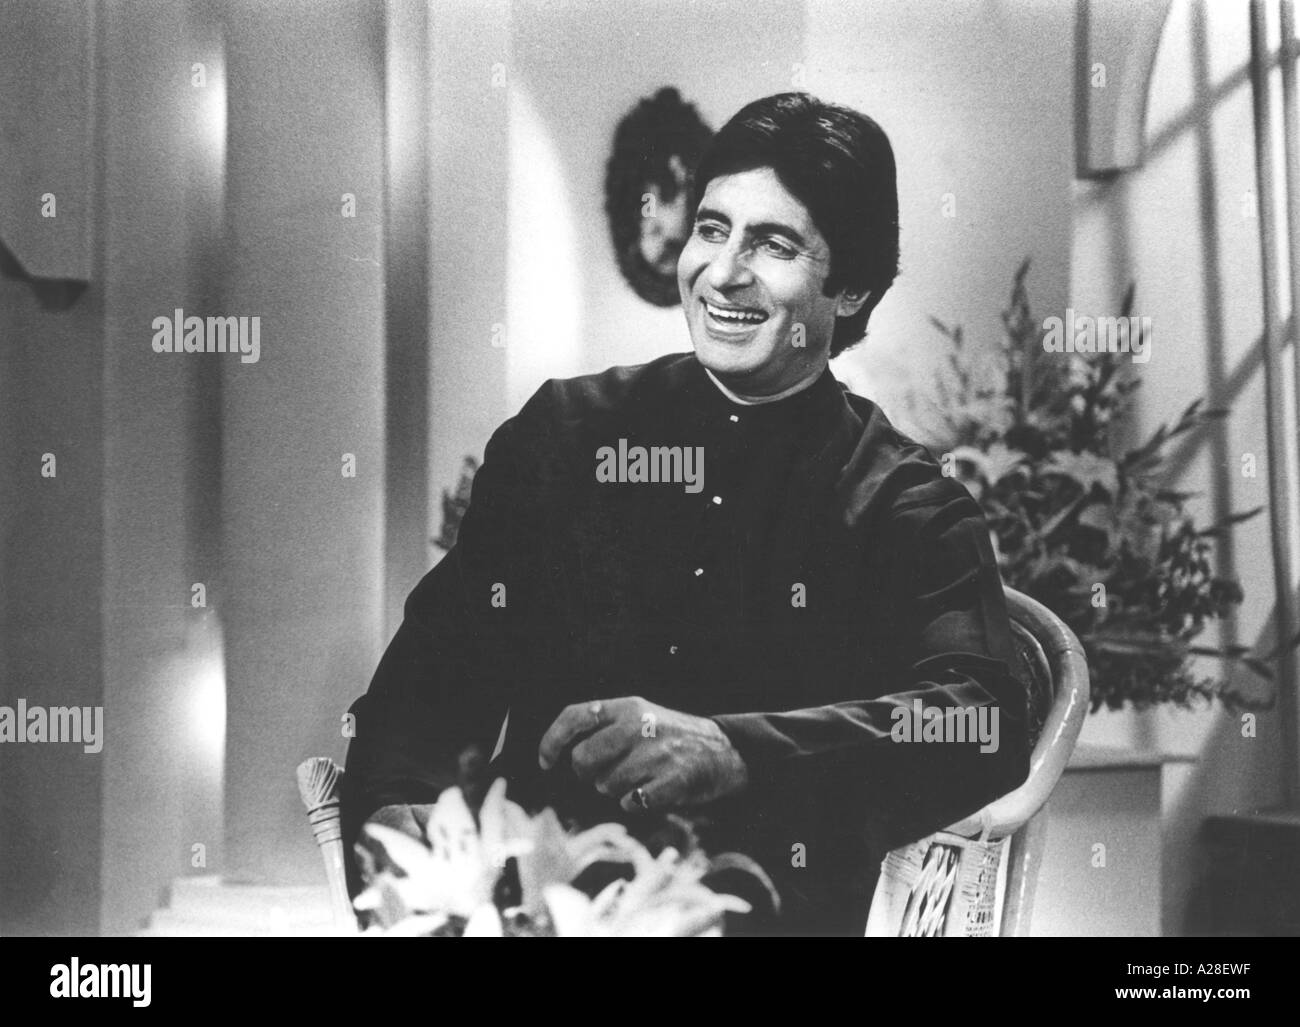 Amitabh Bachchan, Indian Bollywood hindi movie film star actor, smiling in a TV interview, India Stock Photo